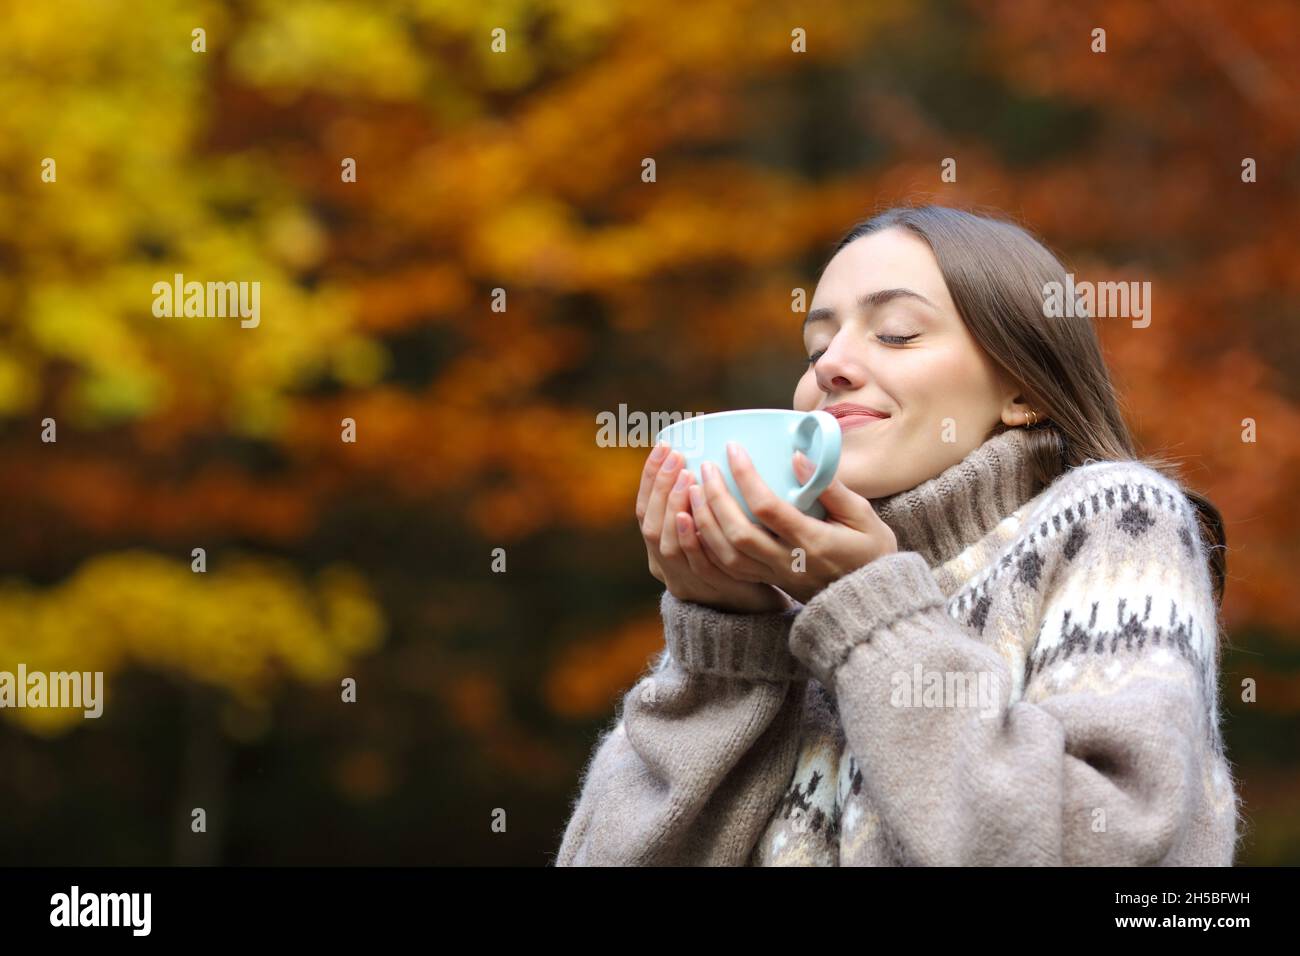 Happy woman in autumn smelling coffee holding mug in a park Stock Photo